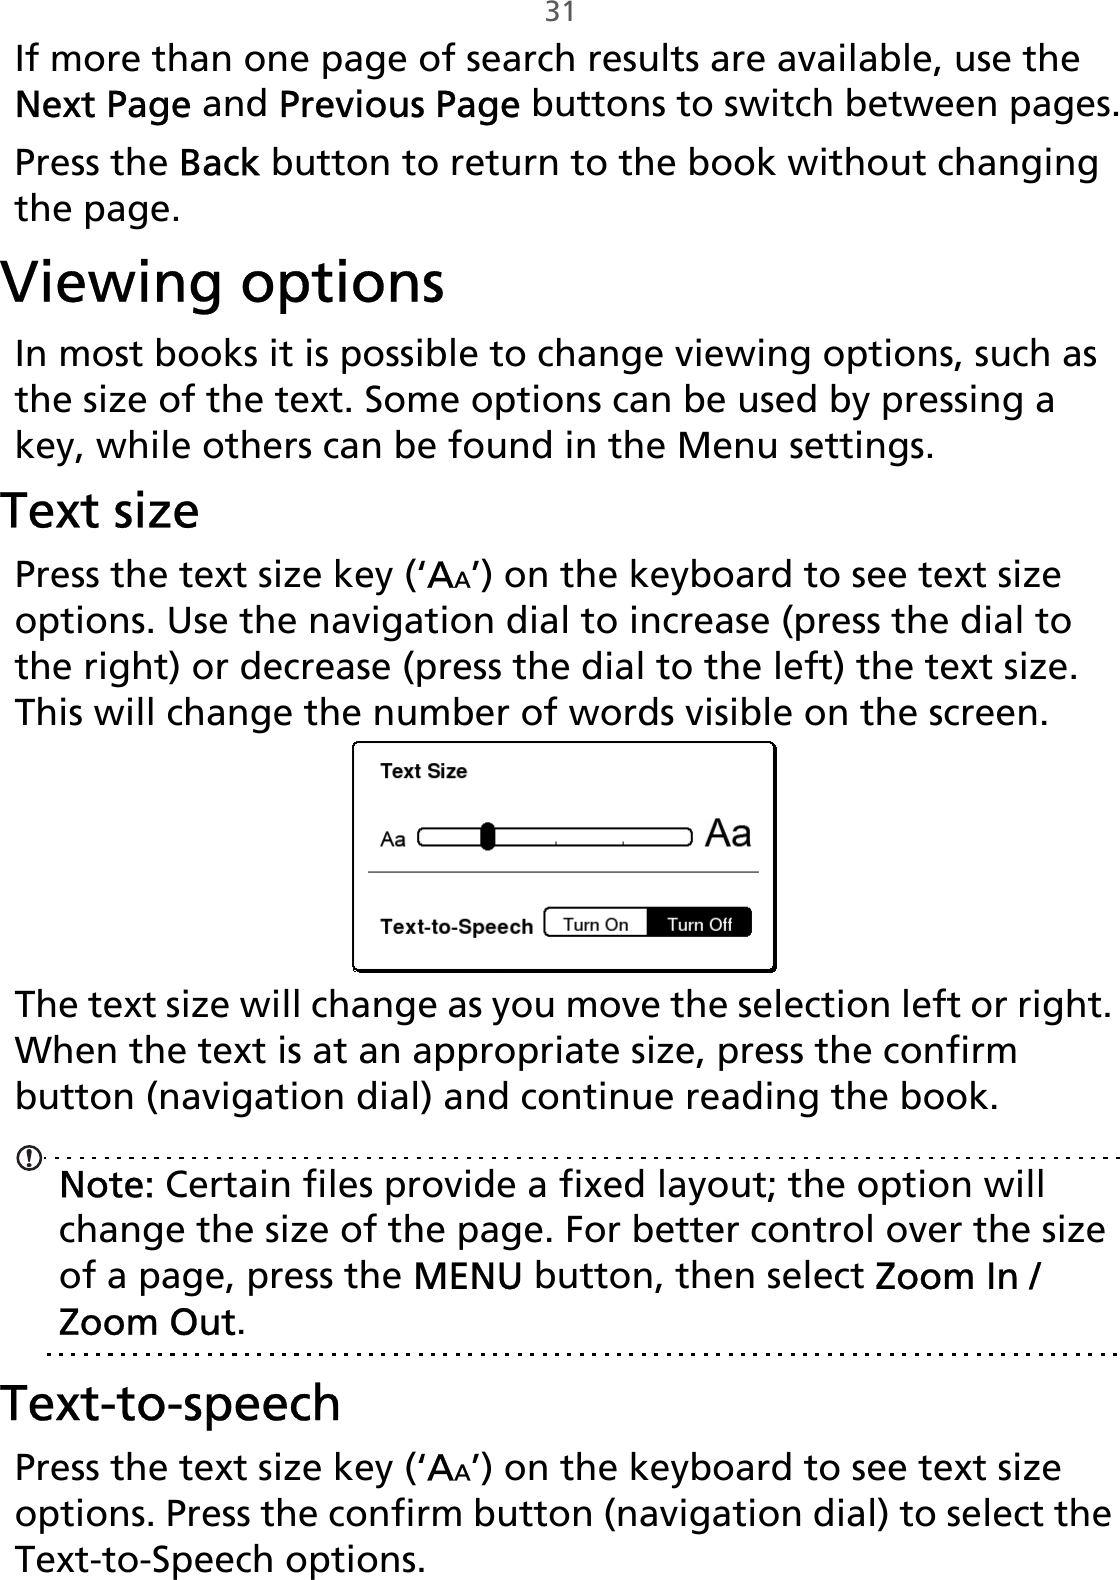 31If more than one page of search results are available, use the Next Page and Previous Page buttons to switch between pages.Press the Back button to return to the book without changing the page.Viewing optionsIn most books it is possible to change viewing options, such as the size of the text. Some options can be used by pressing a key, while others can be found in the Menu settings.Text sizePress the text size key (‘AA’) on the keyboard to see text size options. Use the navigation dial to increase (press the dial to the right) or decrease (press the dial to the left) the text size. This will change the number of words visible on the screen.The text size will change as you move the selection left or right. When the text is at an appropriate size, press the confirm button (navigation dial) and continue reading the book.Note: Certain files provide a fixed layout; the option will change the size of the page. For better control over the size of a page, press the MENU button, then select Zoom In / Zoom Out.Text-to-speechPress the text size key (‘AA’) on the keyboard to see text size options. Press the confirm button (navigation dial) to select the Text-to-Speech options. 